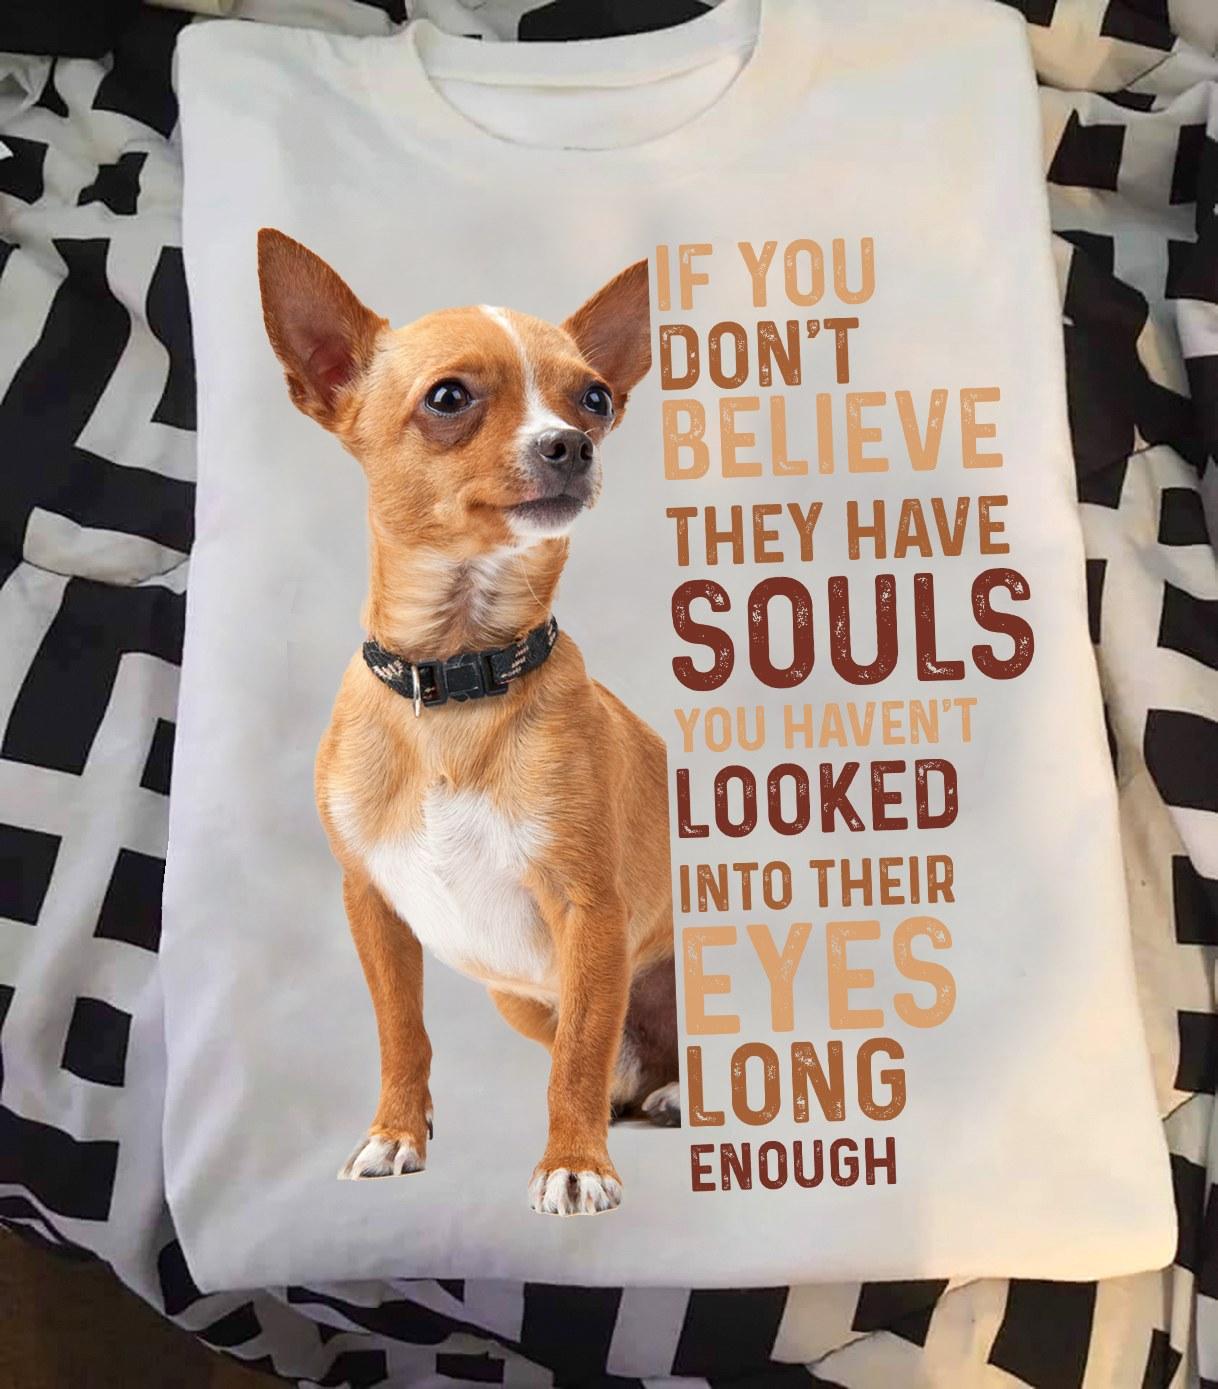 If you don't believe they have souls you haven't looked into their eyes long enough - Chihuahua dog souls, Chihuahua dog lover